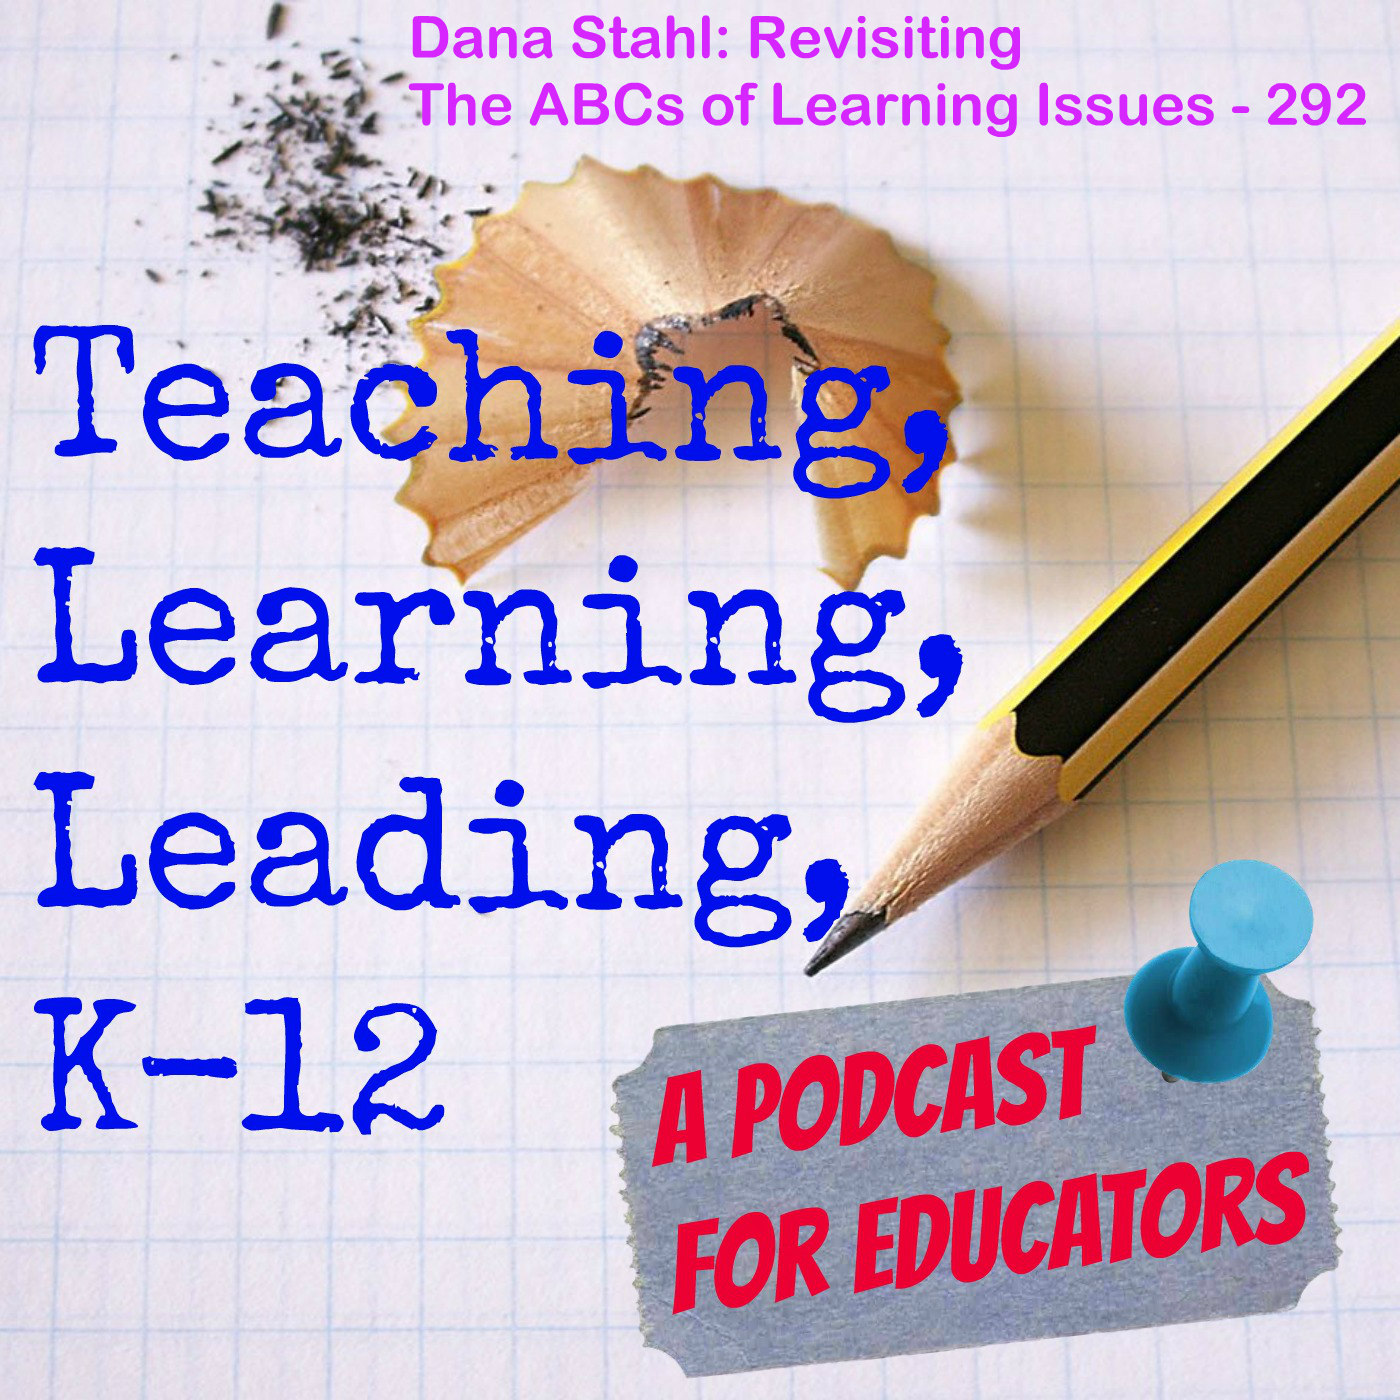 Dana Stahl: Revisiting The ABCs of Learning Issues - 292